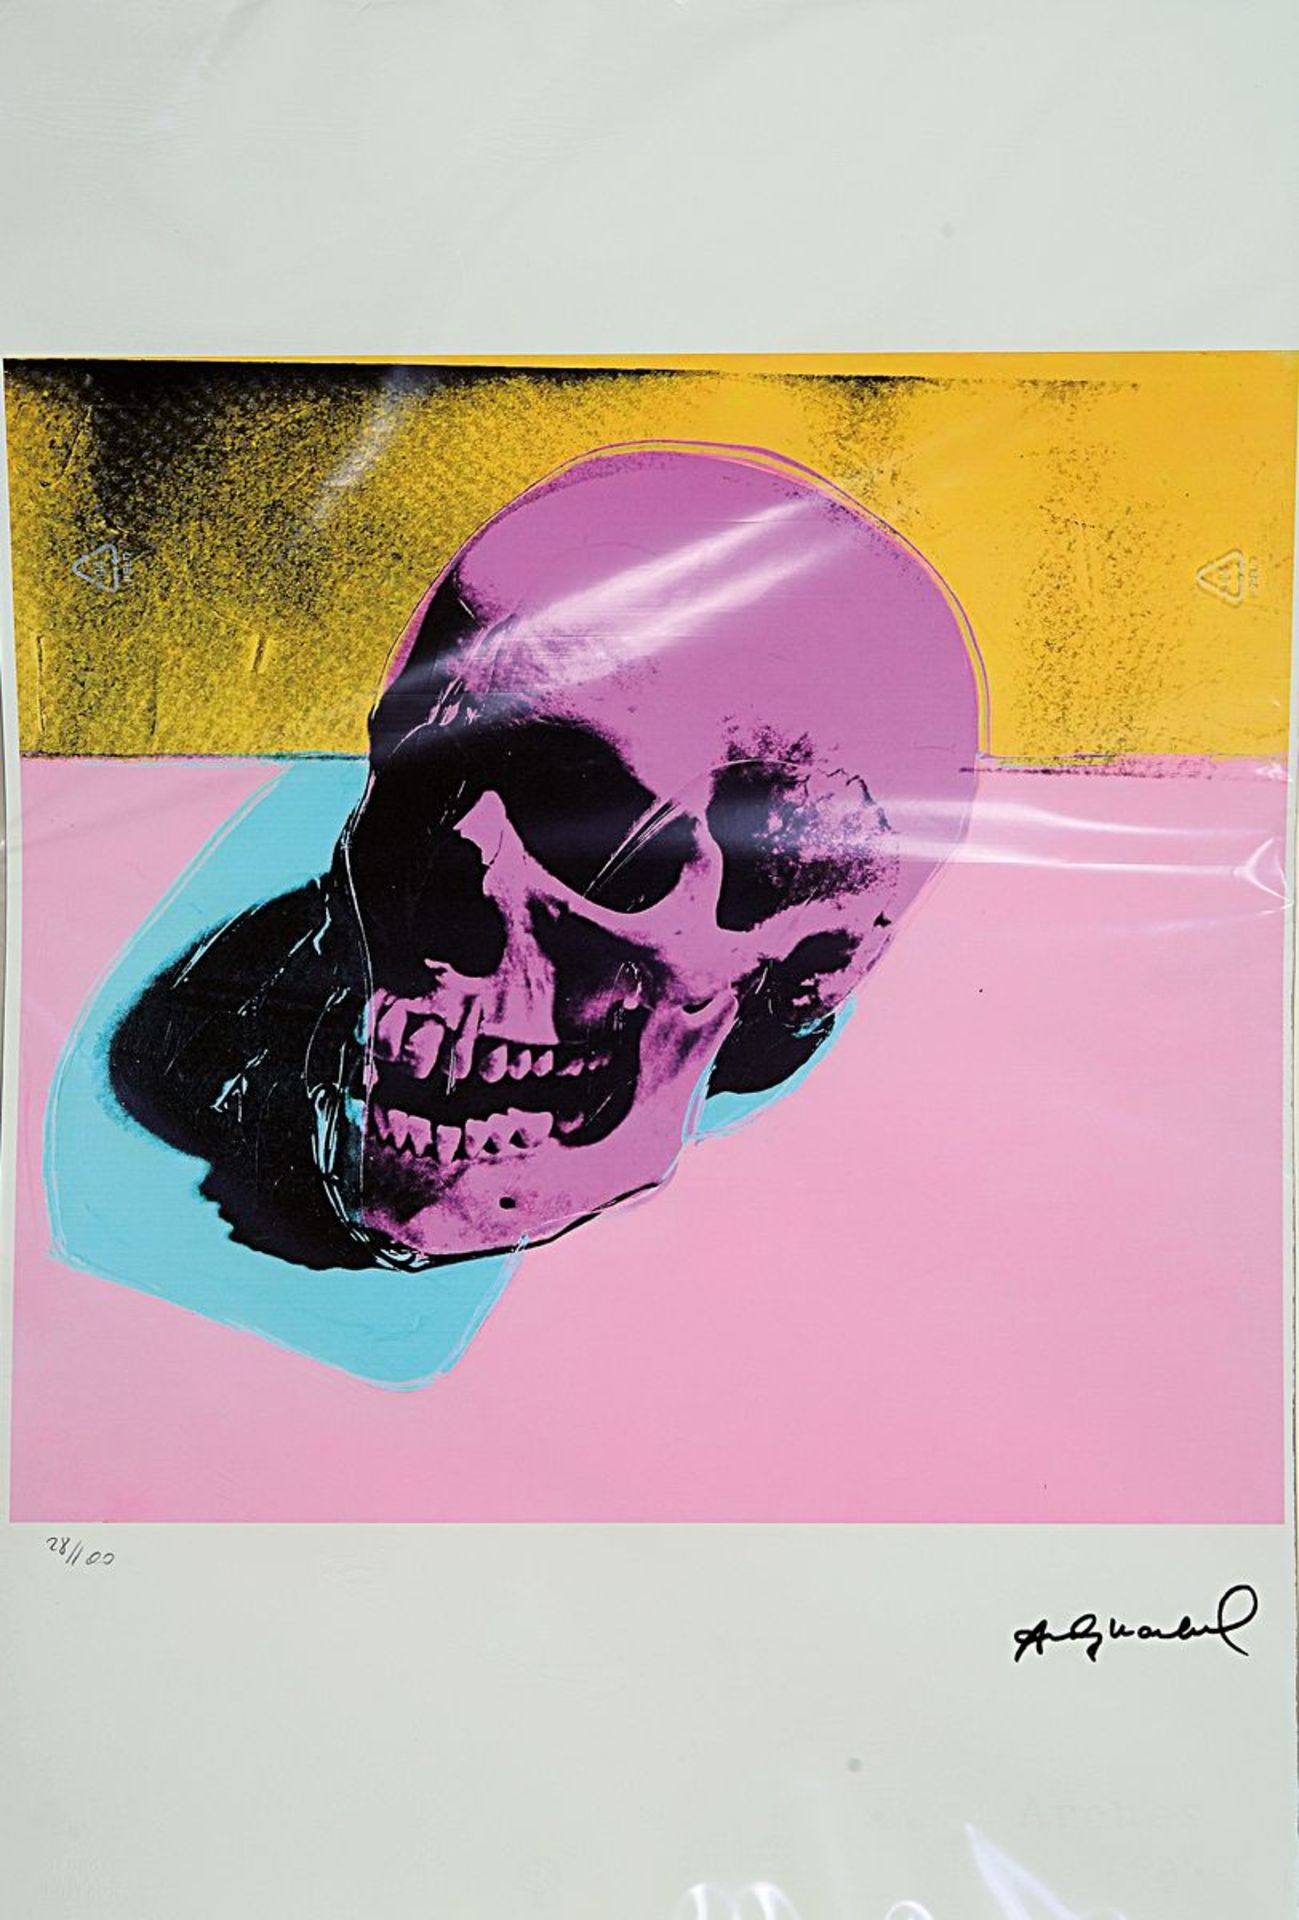 Nach Andy Warhol (1928-1987), Lithographie, 'Skull'